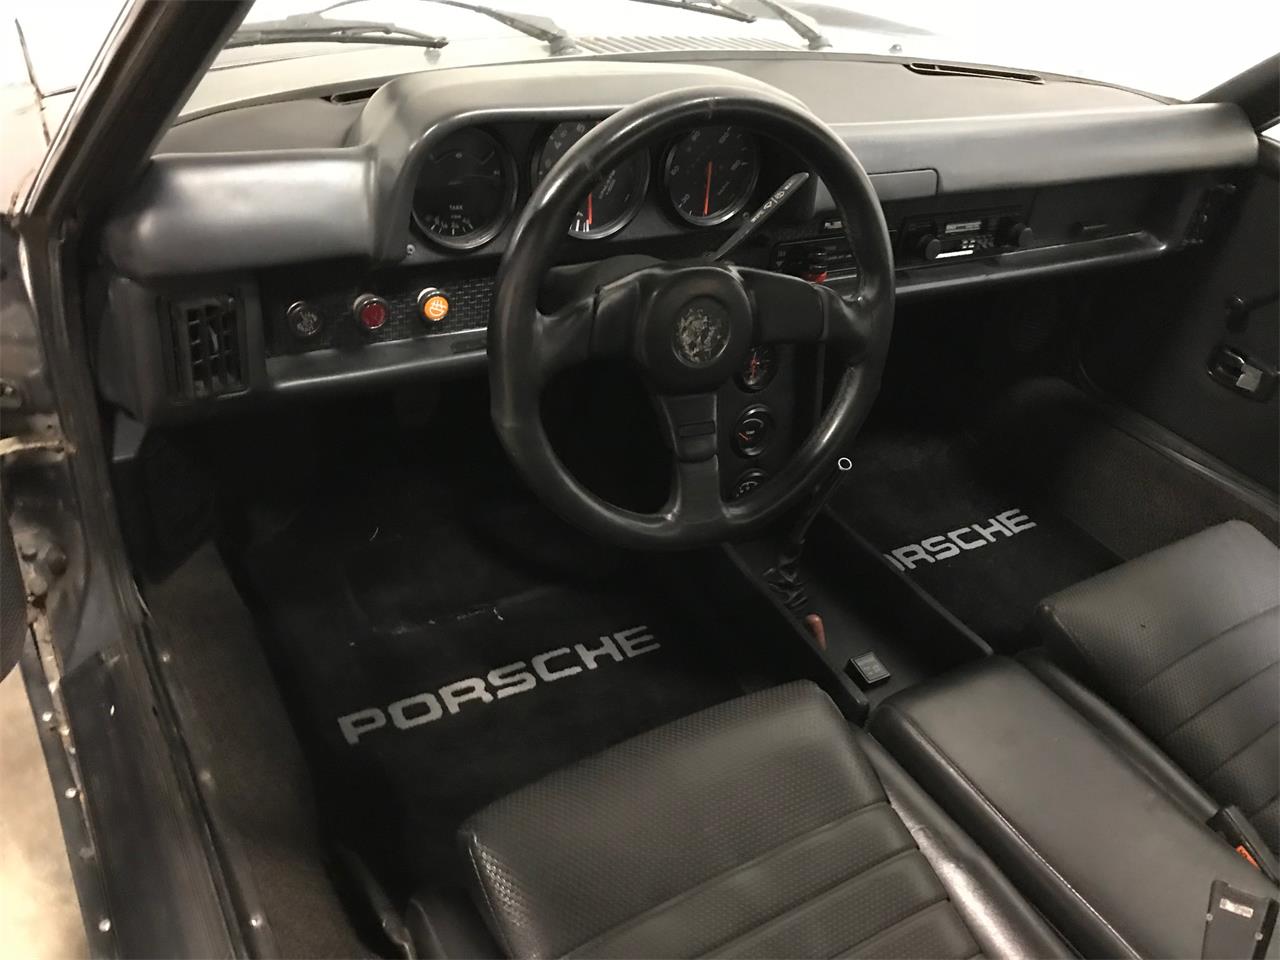 1976 Porsche 914 for sale in Cleveland, OH – photo 11